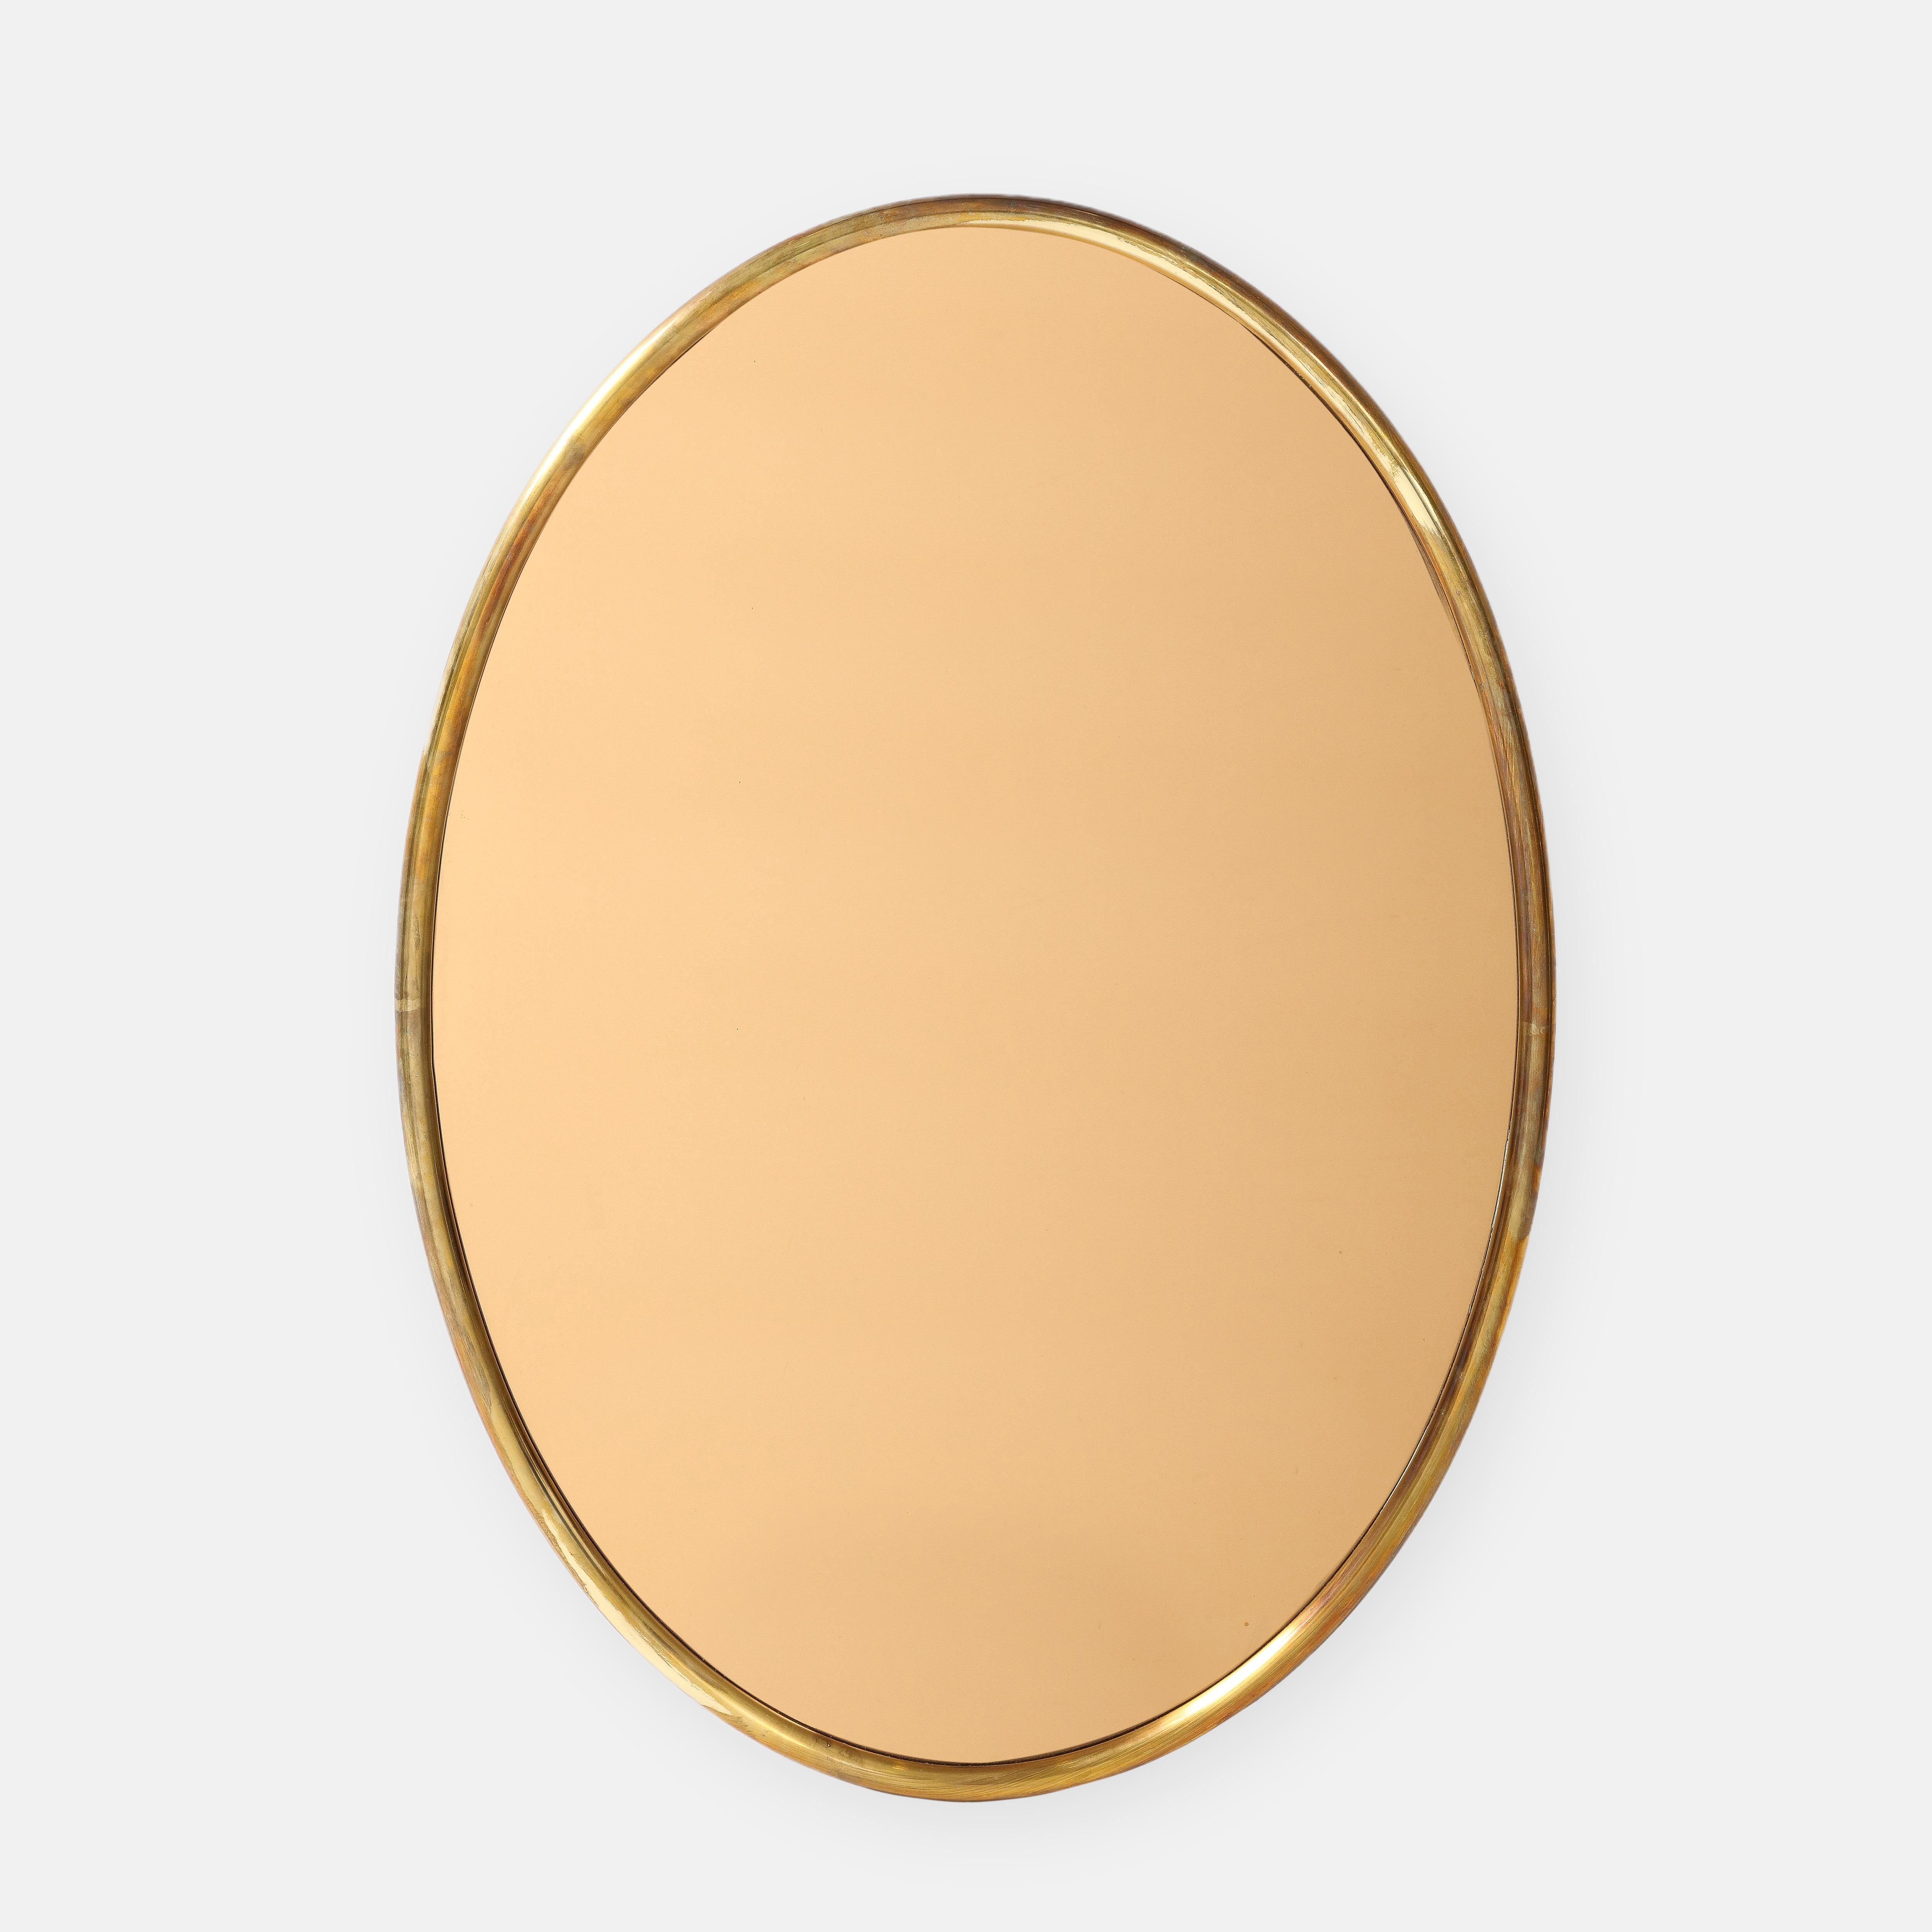 1970s Italian large oval mirror with thick rounded lacquered brass frame and rose gold mirrored glass with wood backing.  This chic mirror has a lovely patina to the lacquered brass which contrasts beautifully with the elegant rose gold color or the